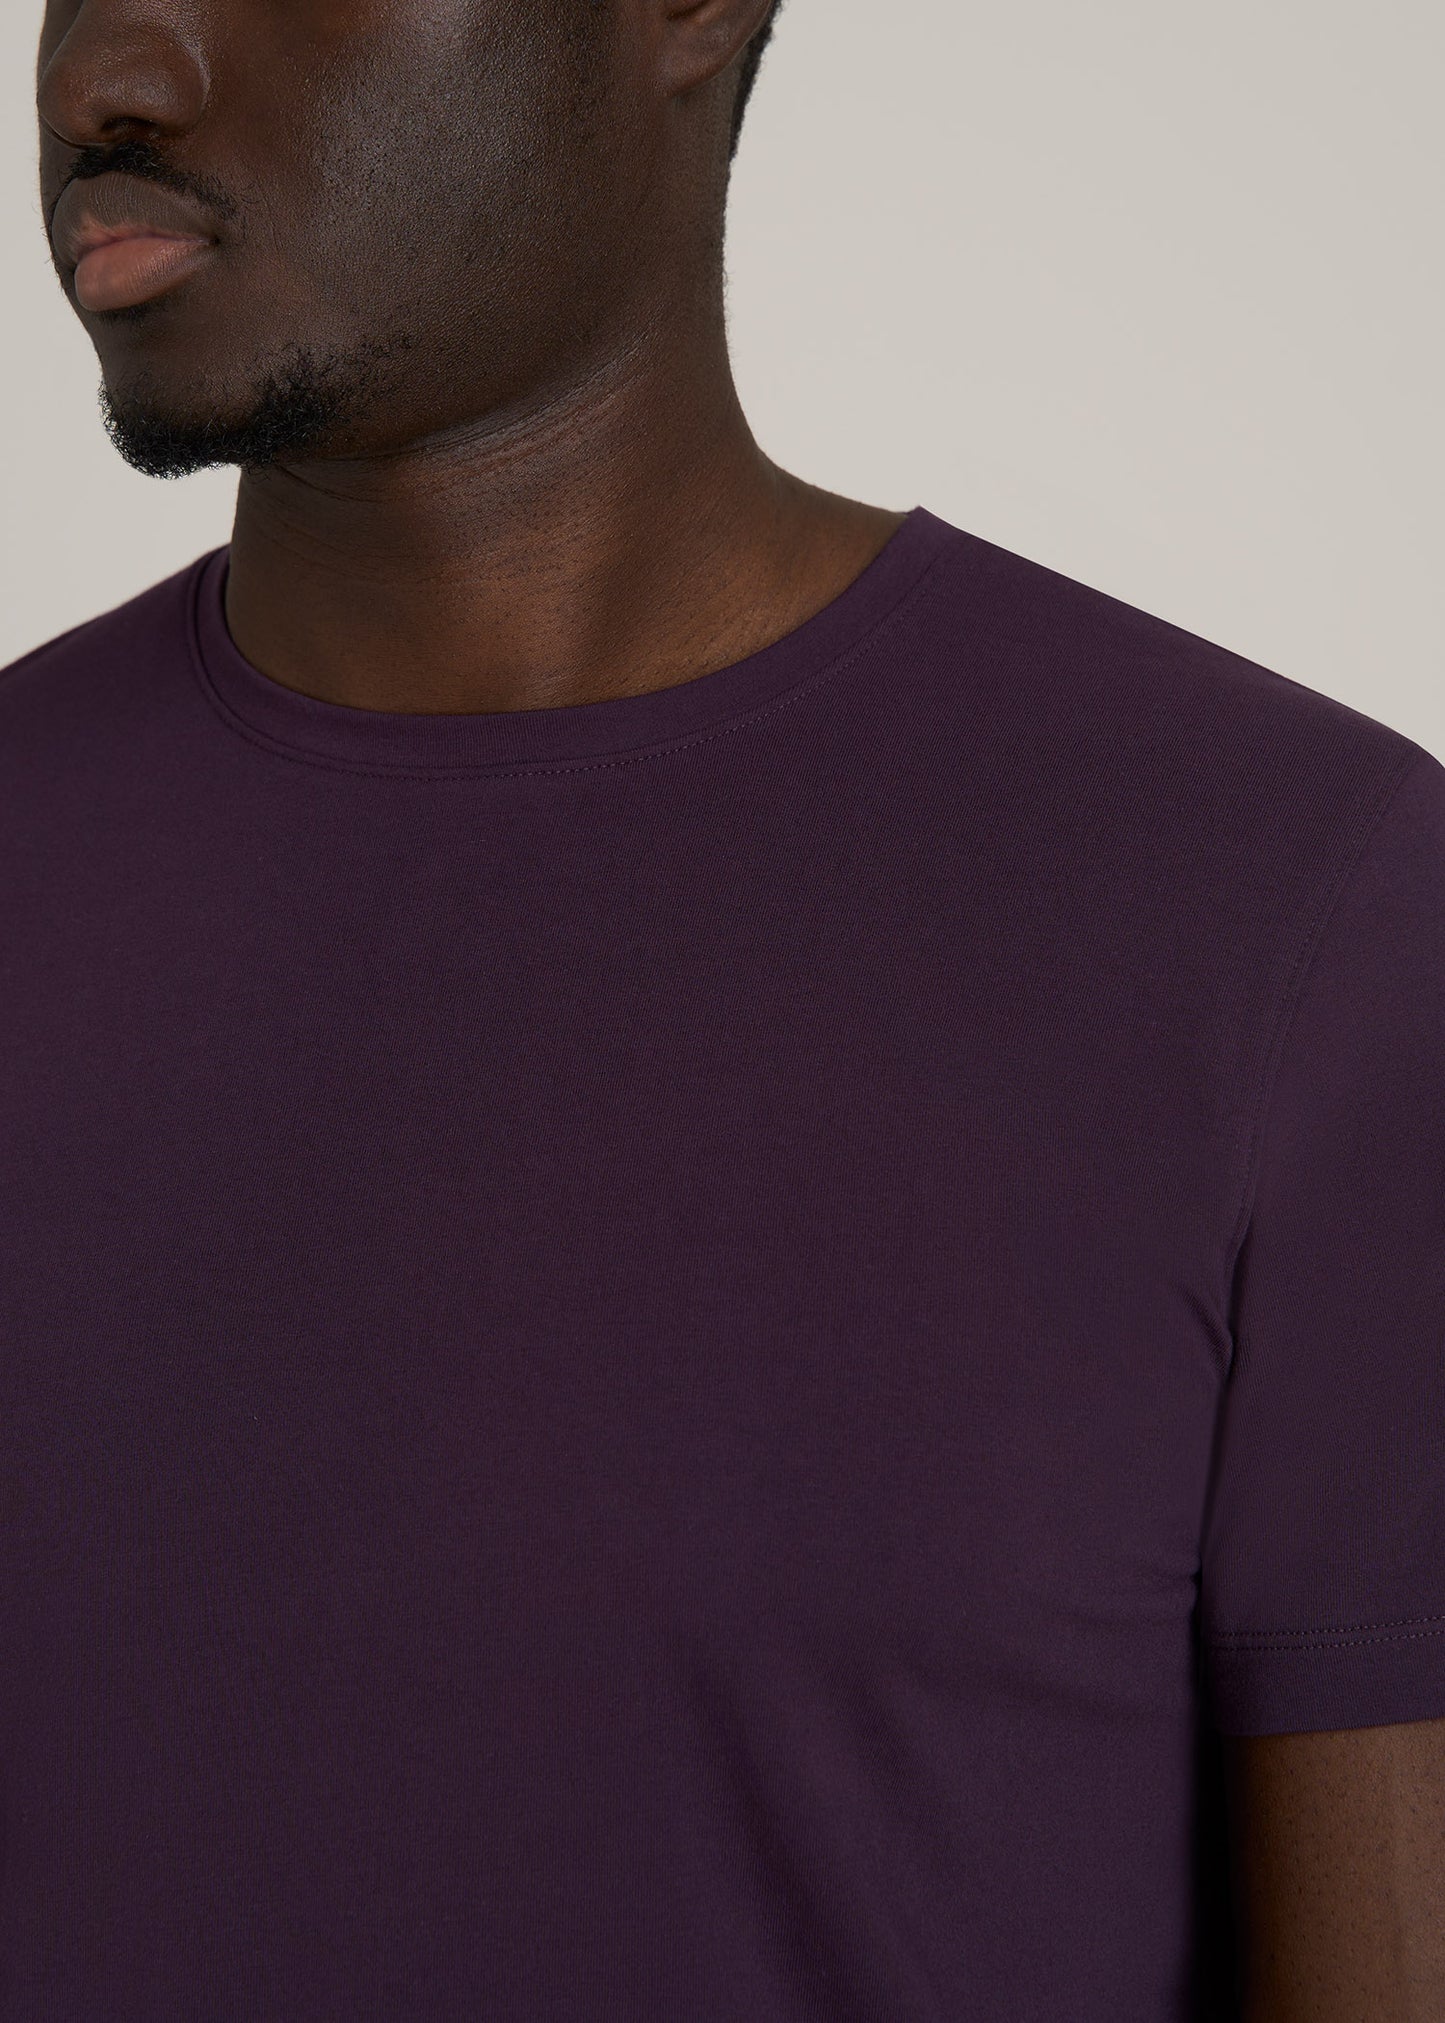 Stretch Cotton MODERN-FIT T-Shirt for Tall Men in Midnight Plum